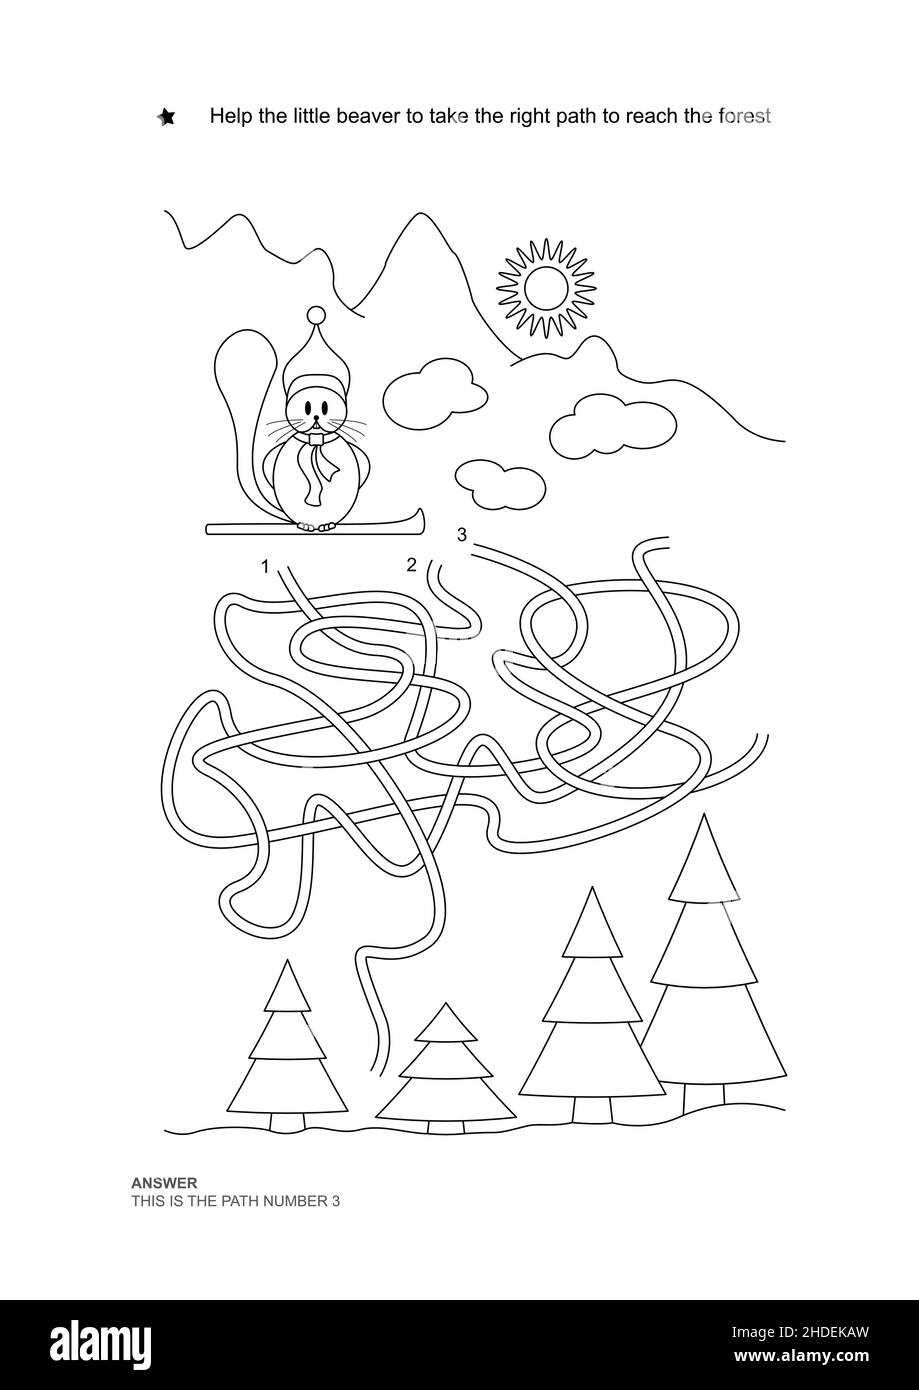 The maze game. Christmas theme. Help the little beaver get on the right path. Game and coloring. Vector illustration. English language. Stock Vector